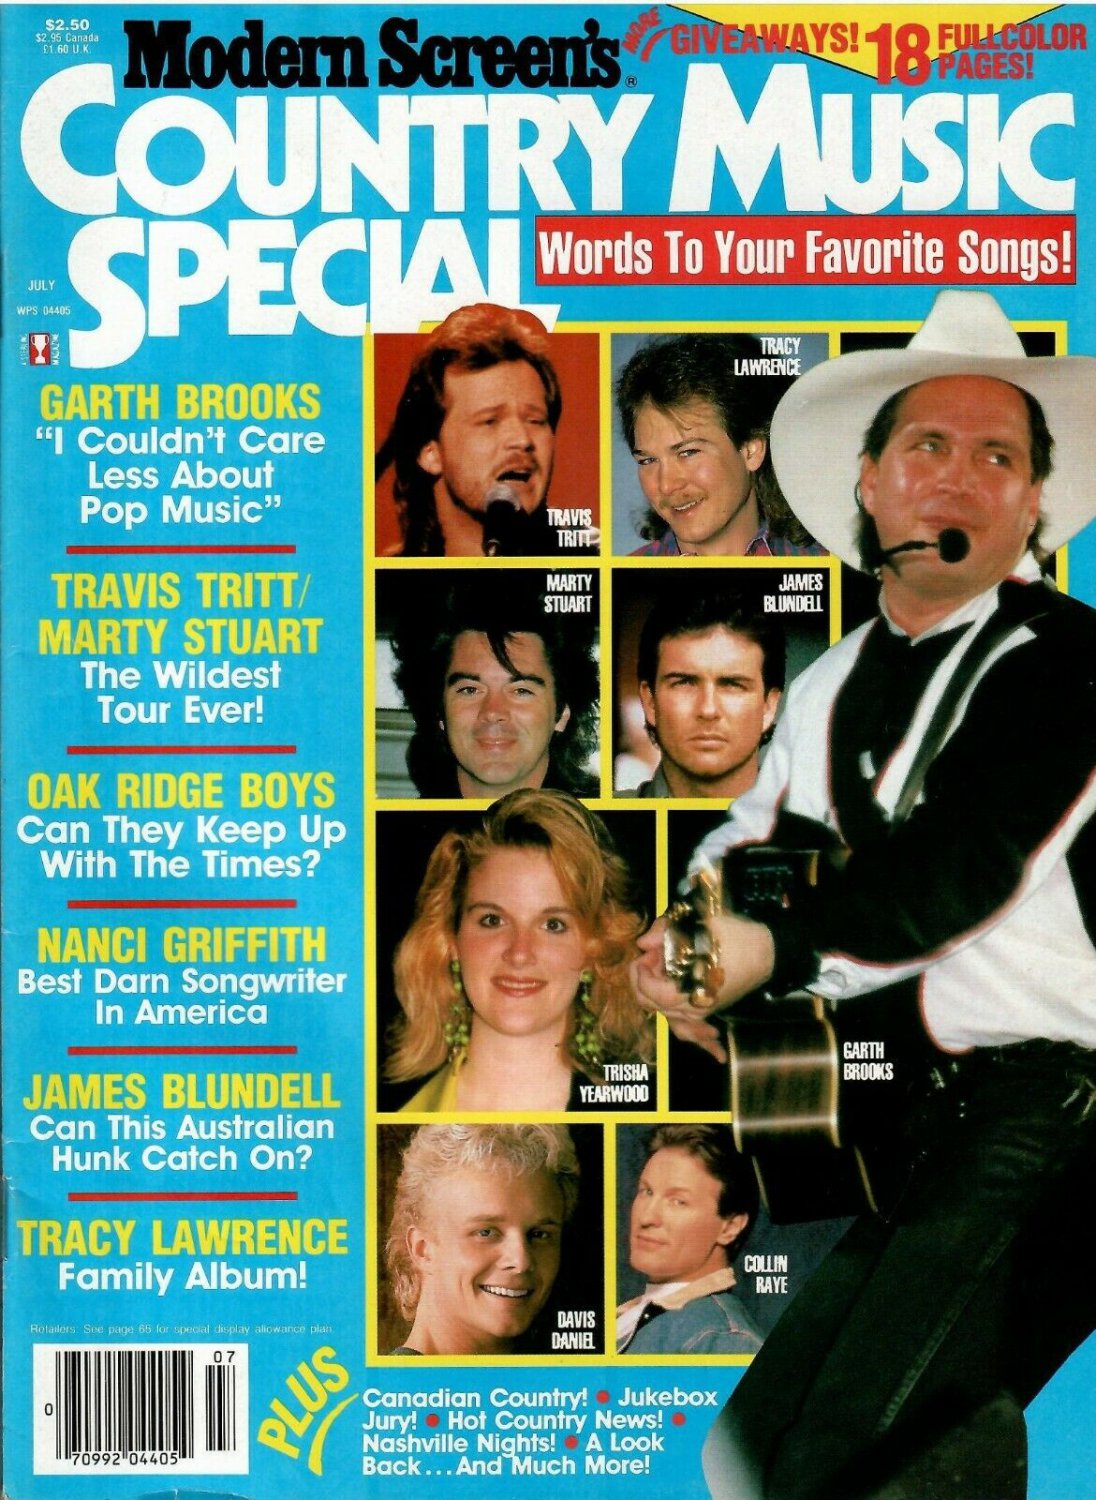 MODERN SCREEN'S COUNTRY MUSIC SPECIAL MAGAZINE July 1992 - 17 Color Pinups